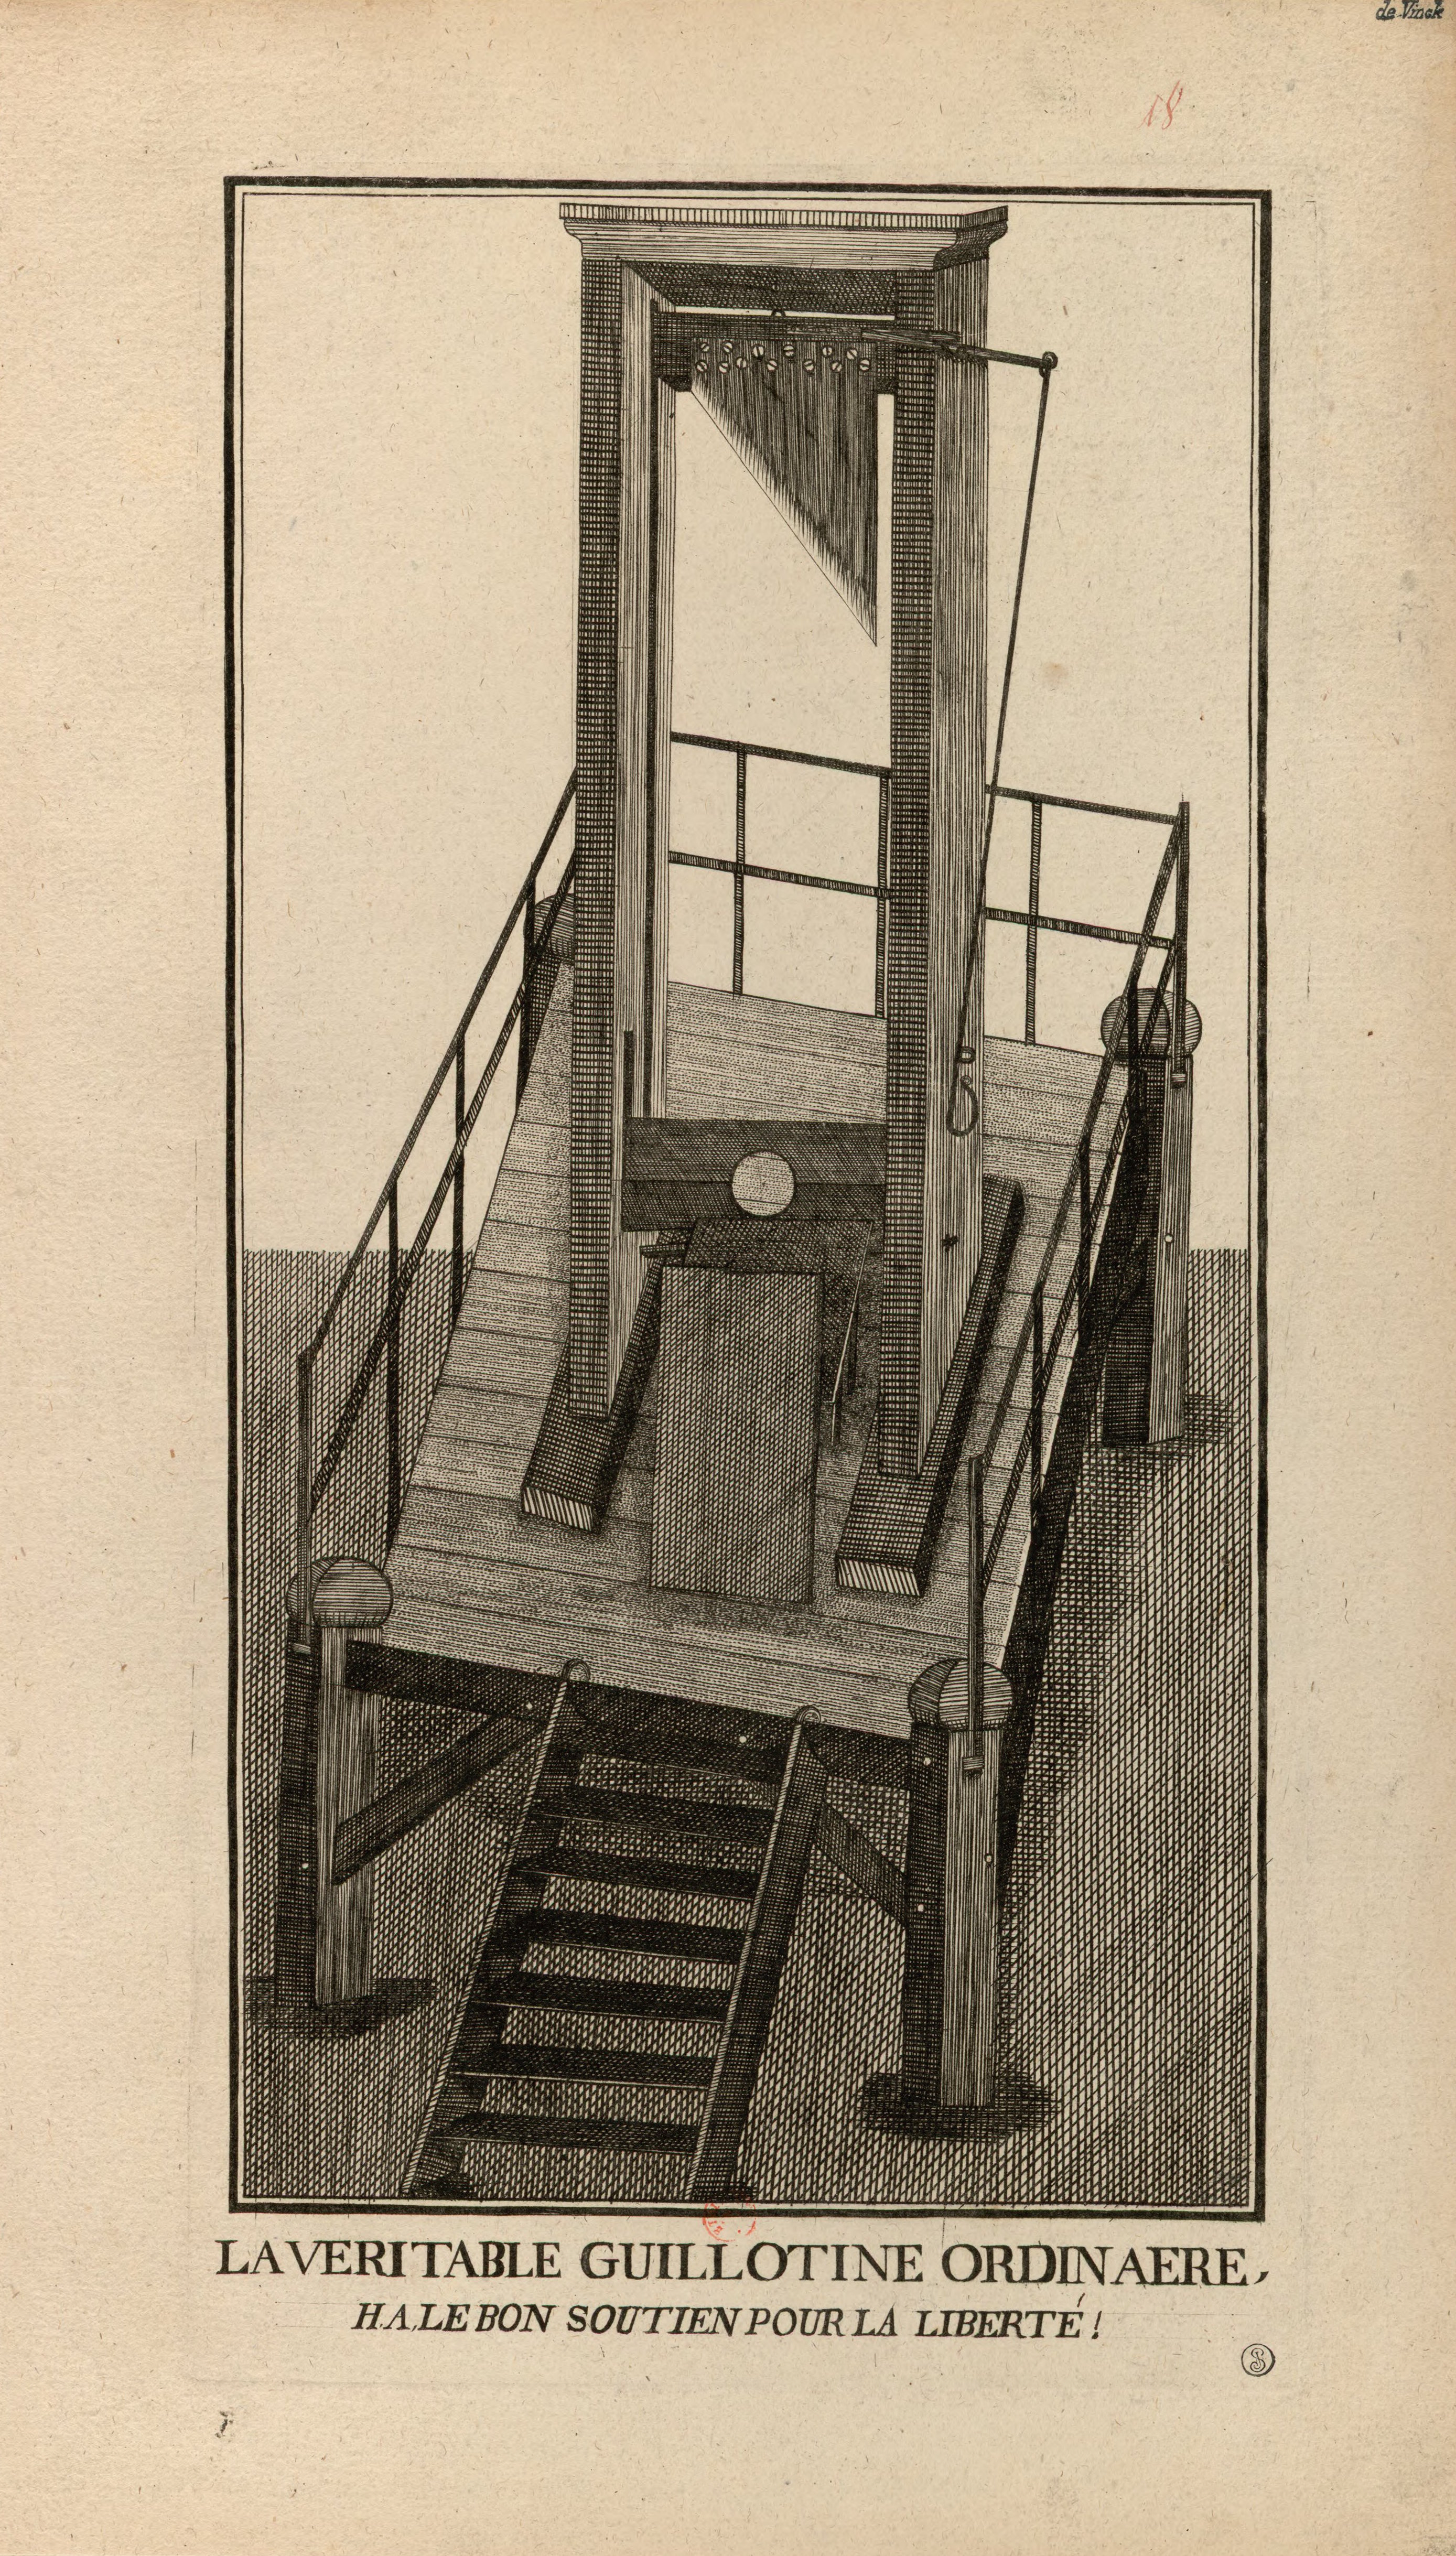 Engraving of image of a guillotine on wooden platform